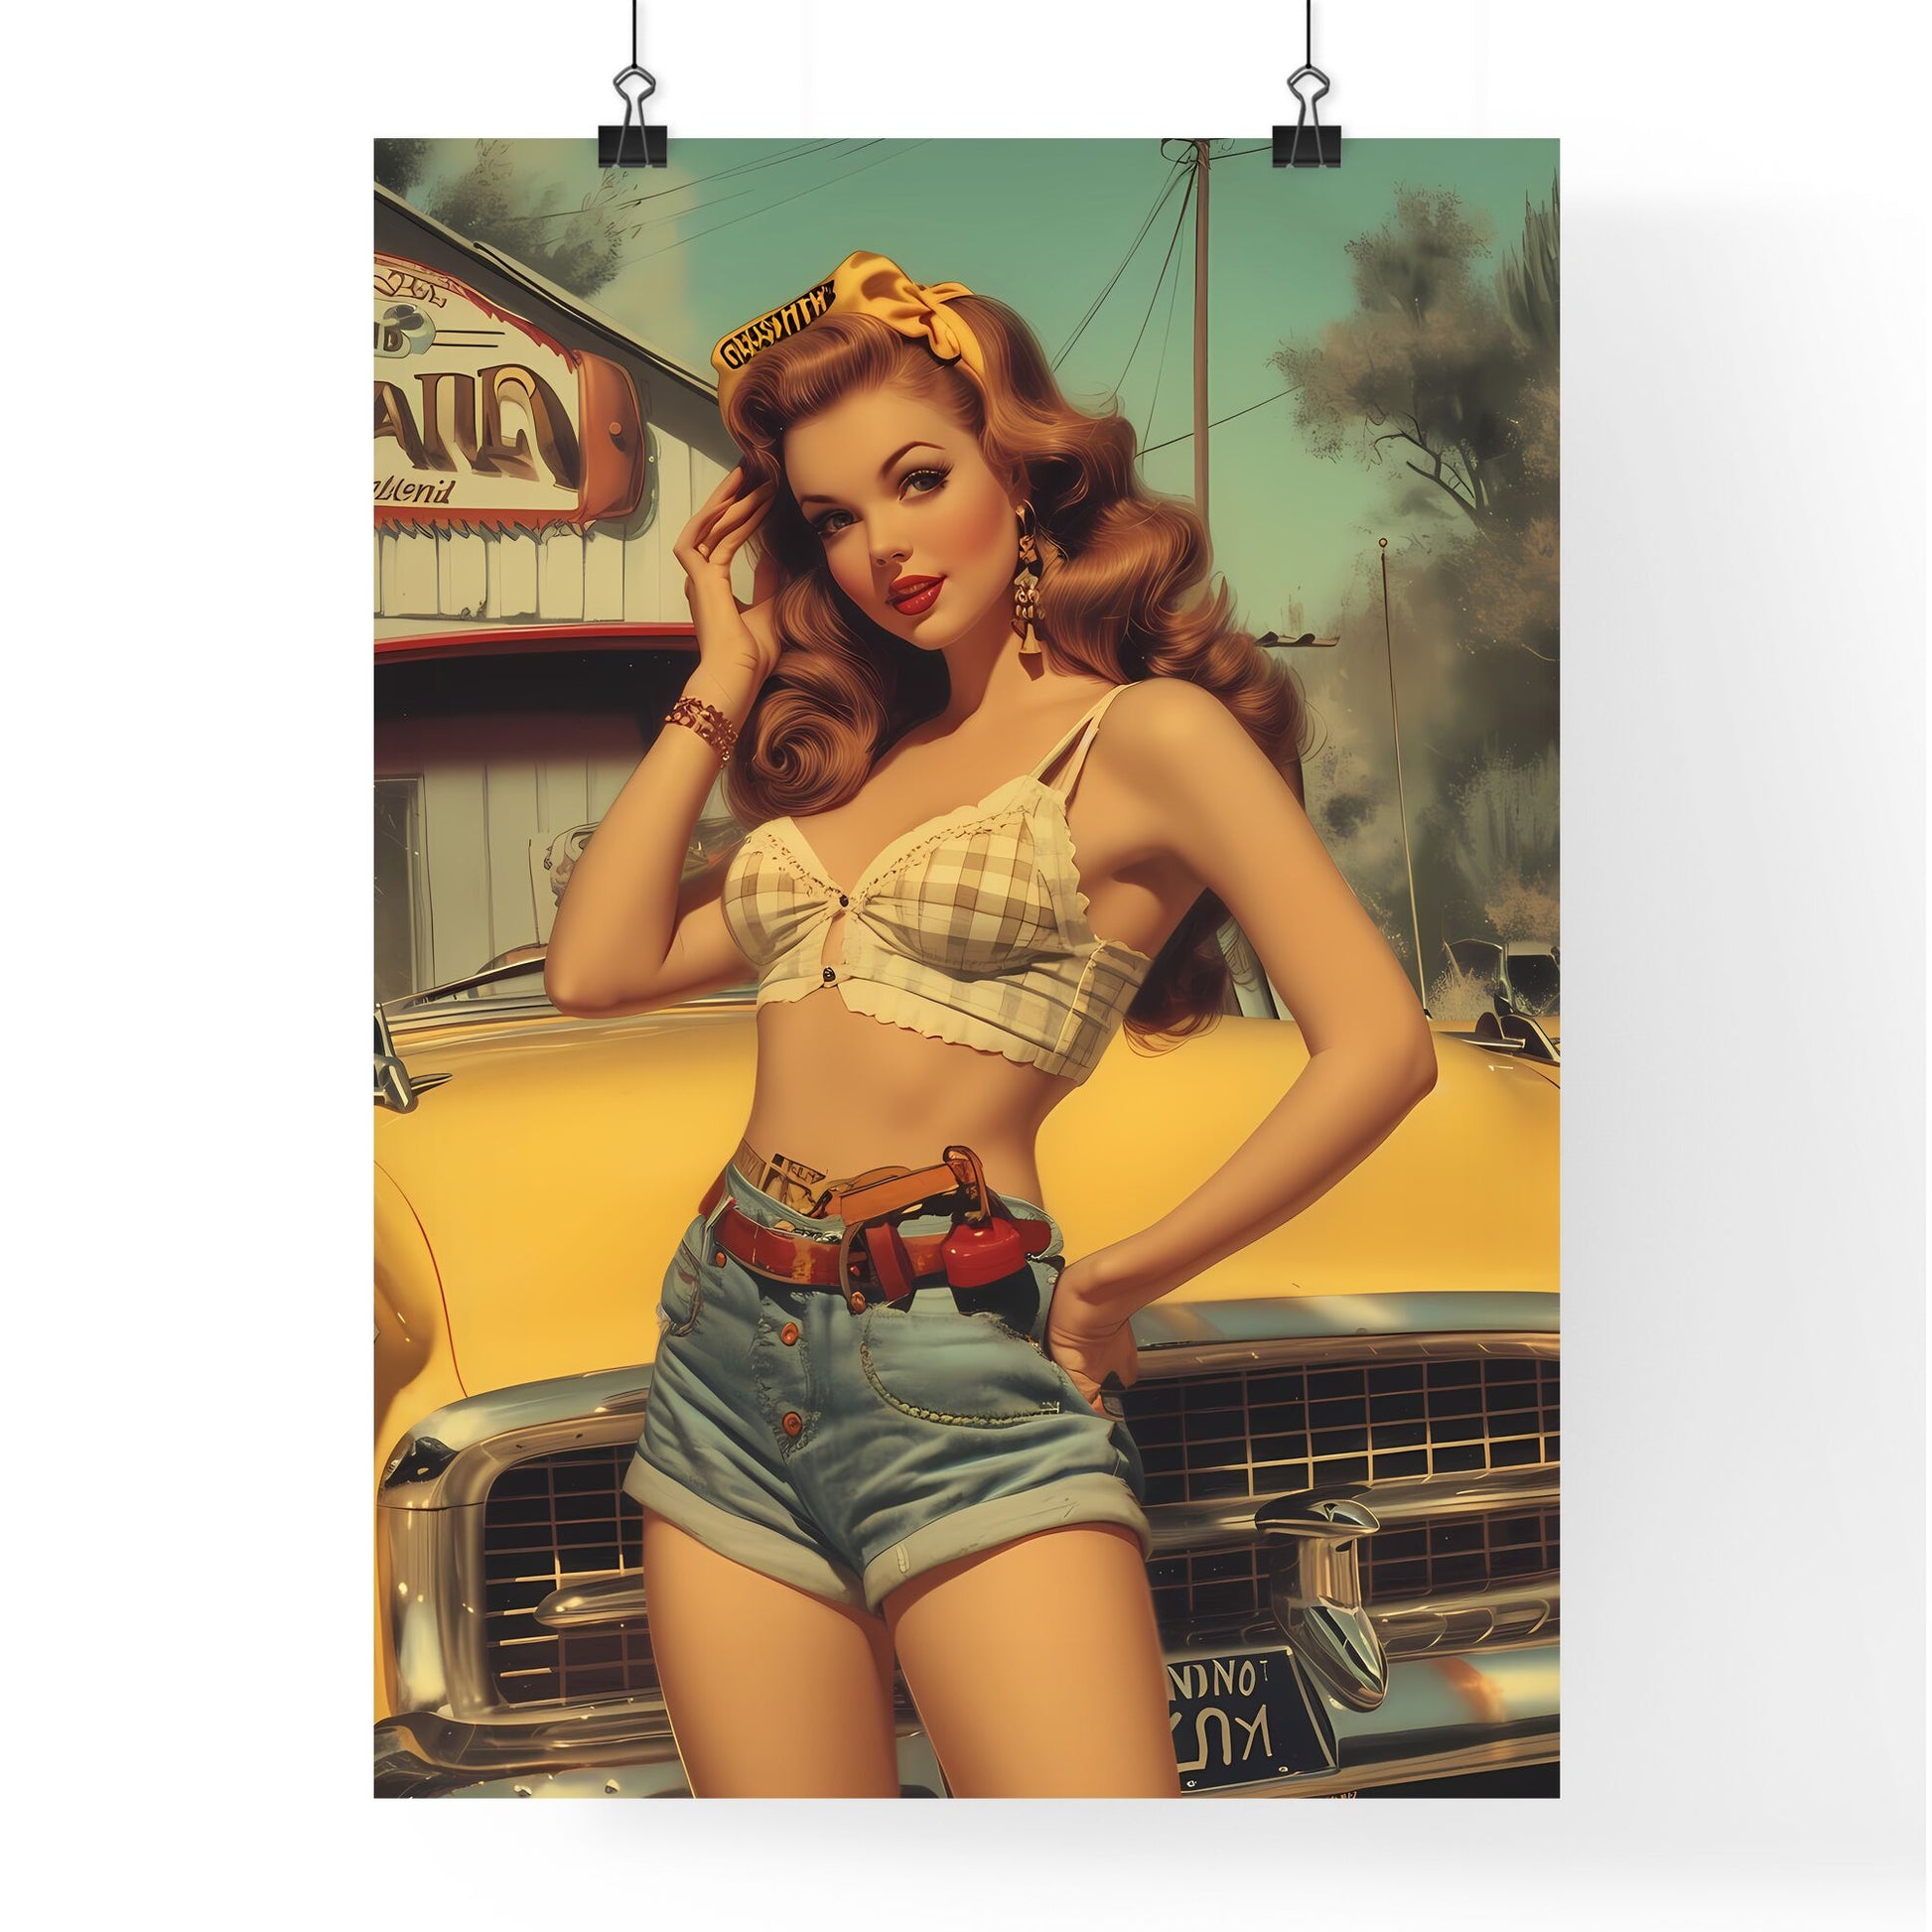 Auto mechanic - Art print of a woman posing in front of a yellow car Default Title